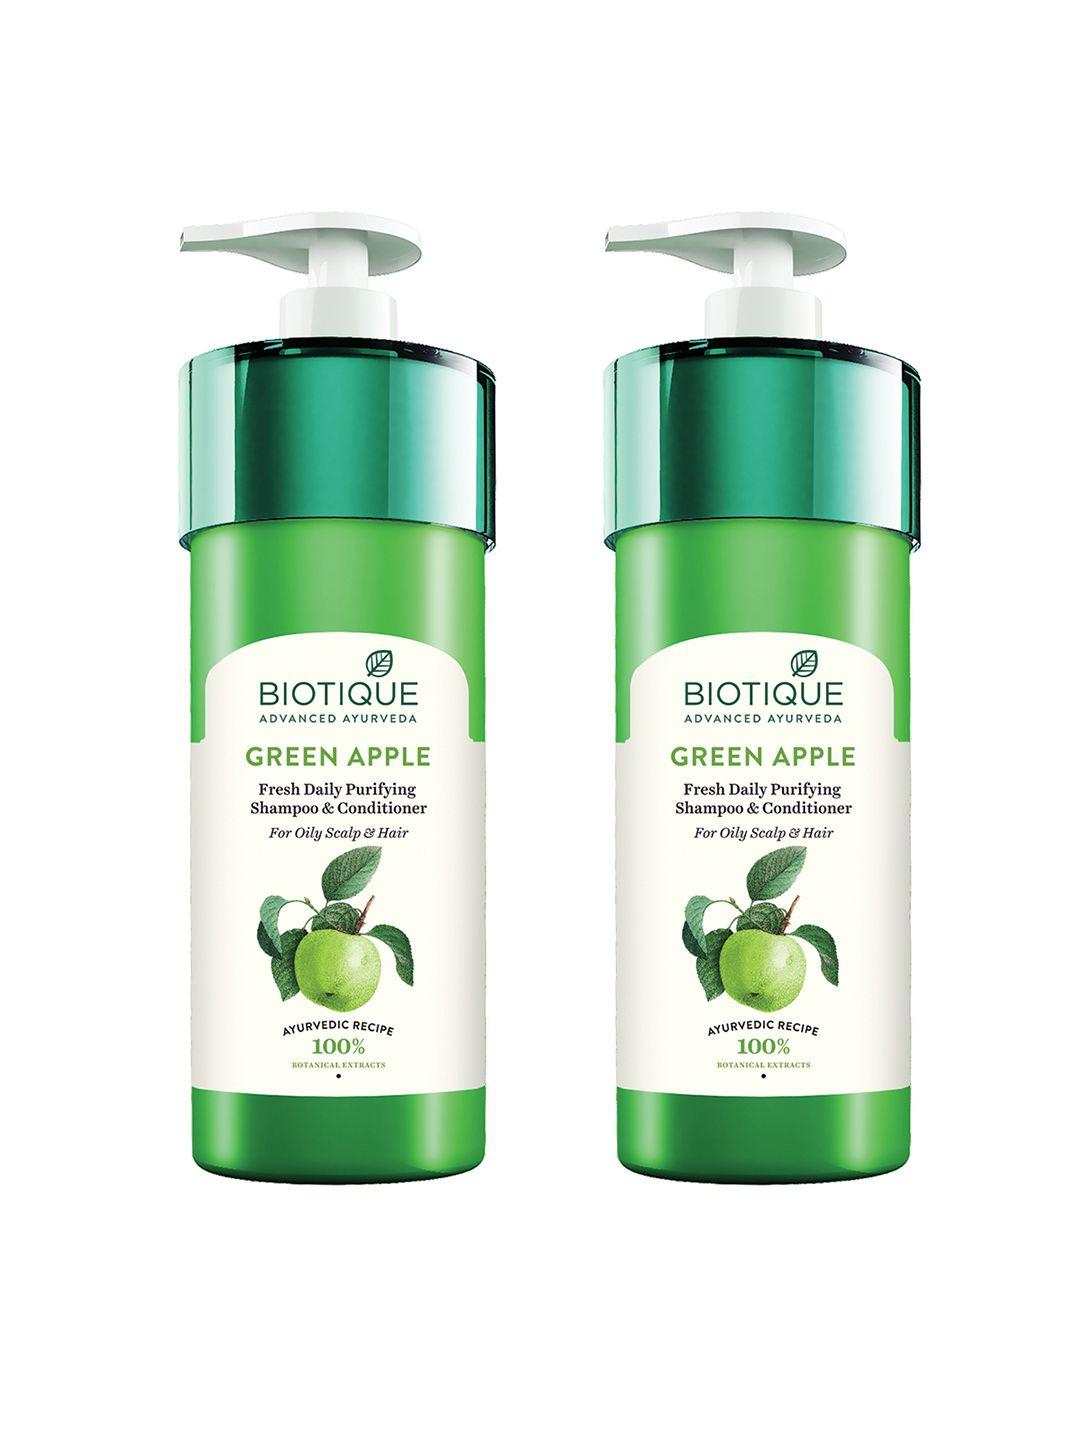 biotique-set-of-2-green-apple-fresh-daily-purifying-shampoo-&-conditioner---800ml-each